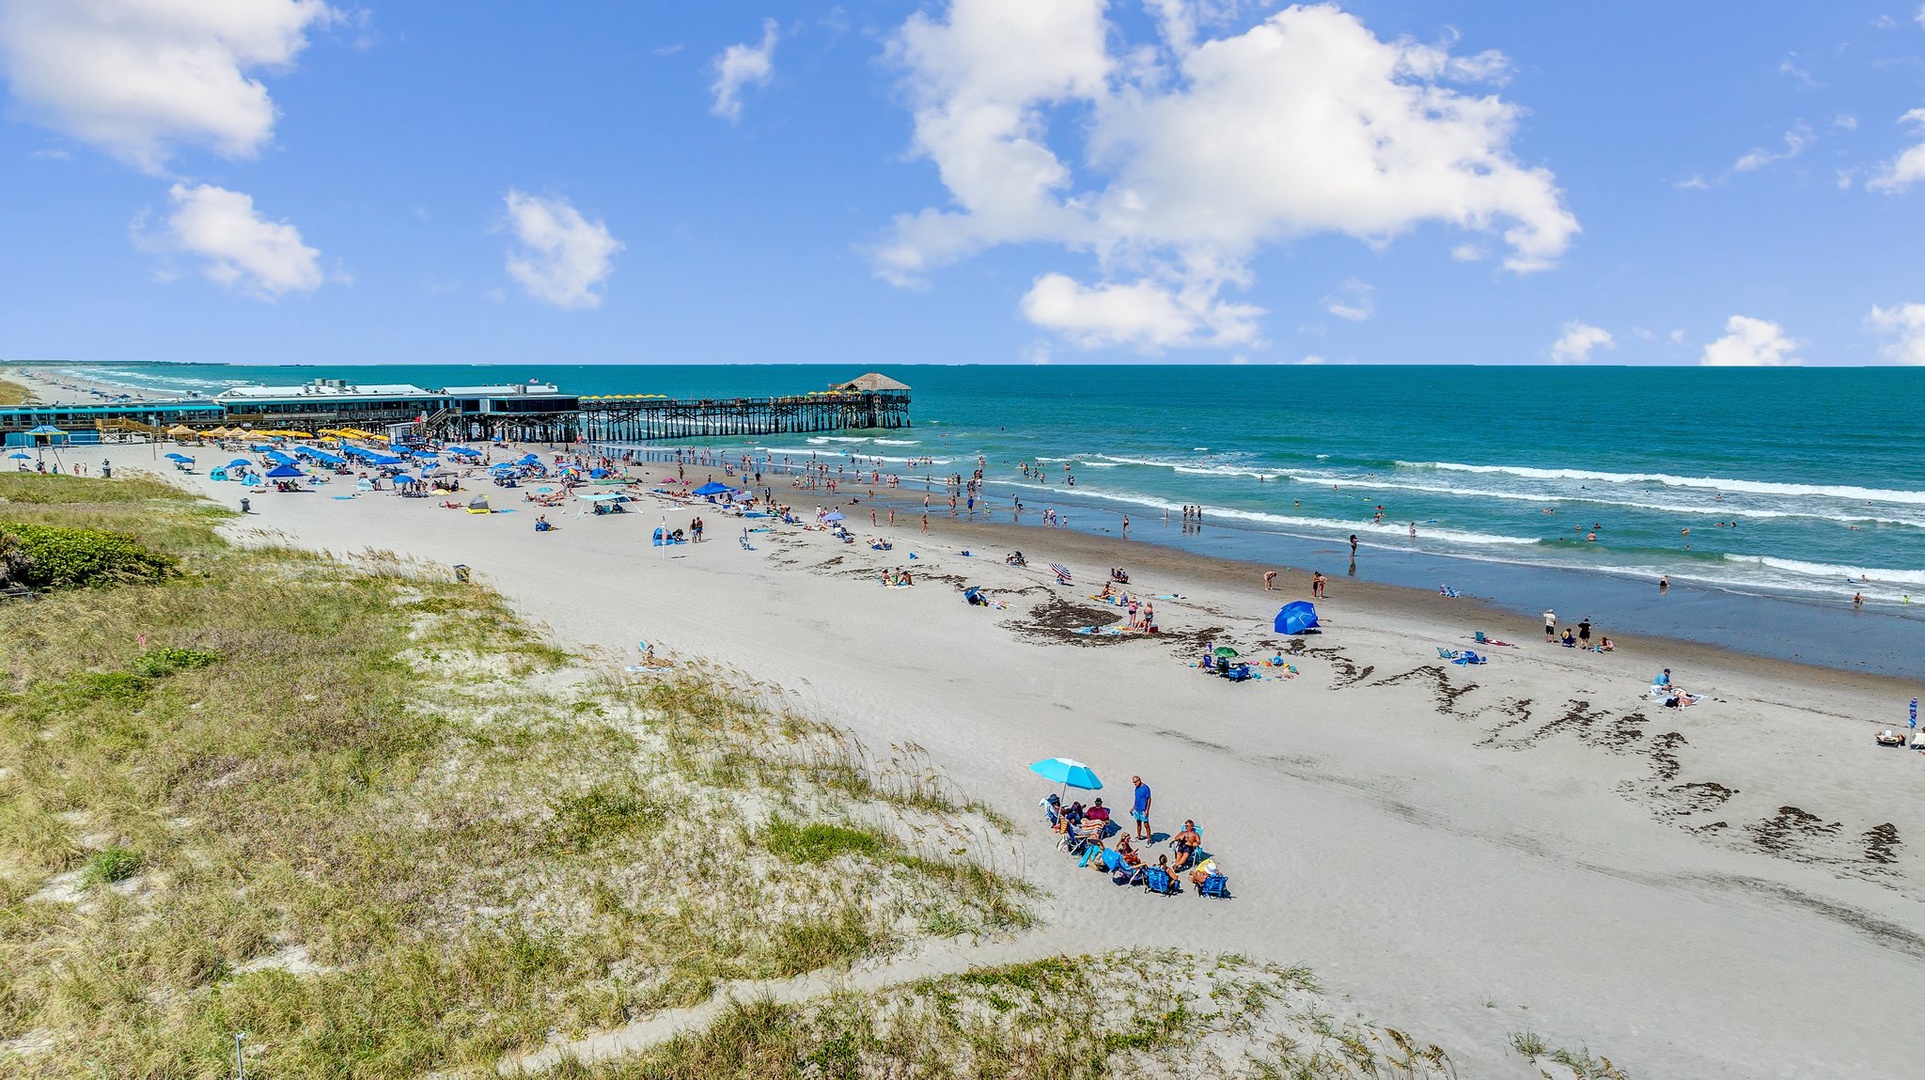 Enjoy being mere steps away from the beach during your visit to Cocoa Beach